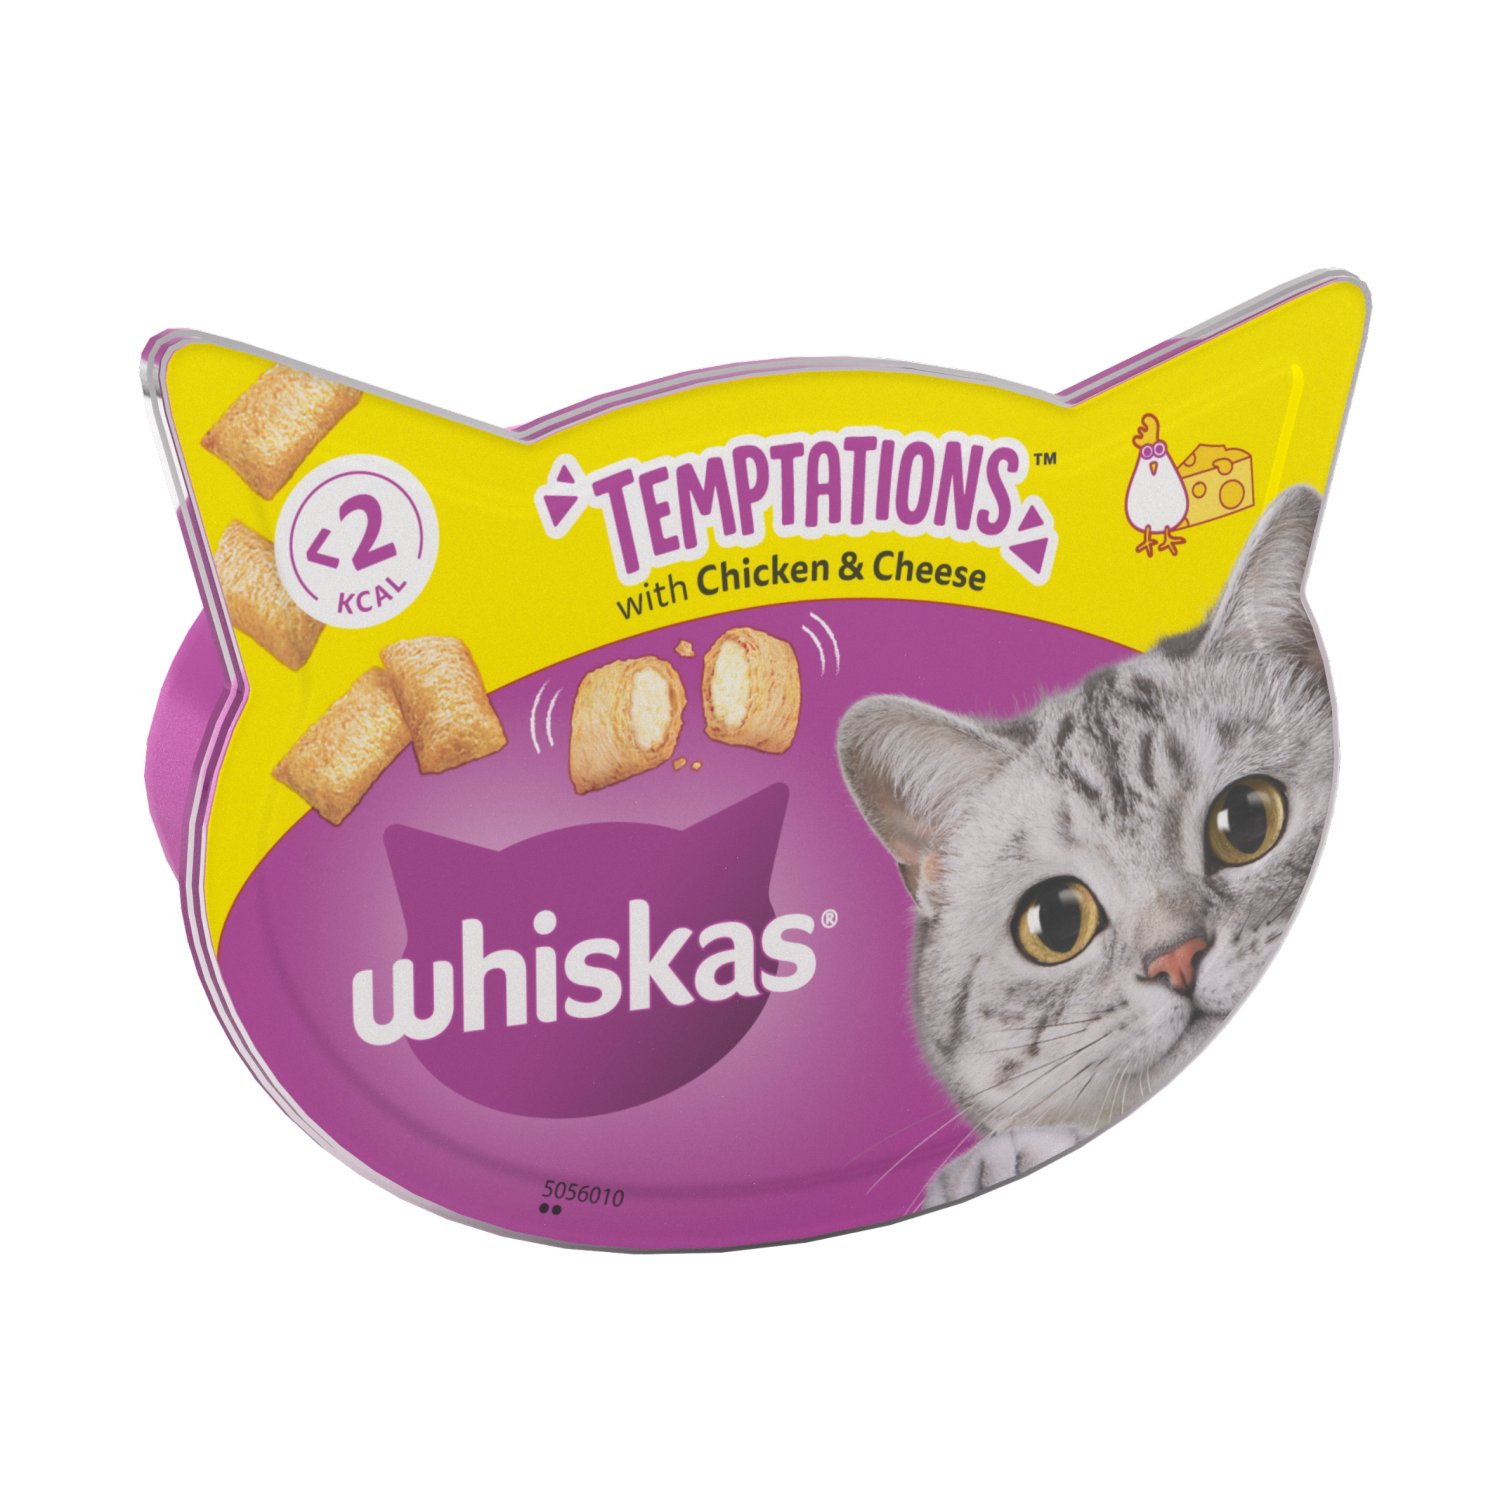 Whiskas Temptations with Chicken & Cheese Cat Treats (60 g)